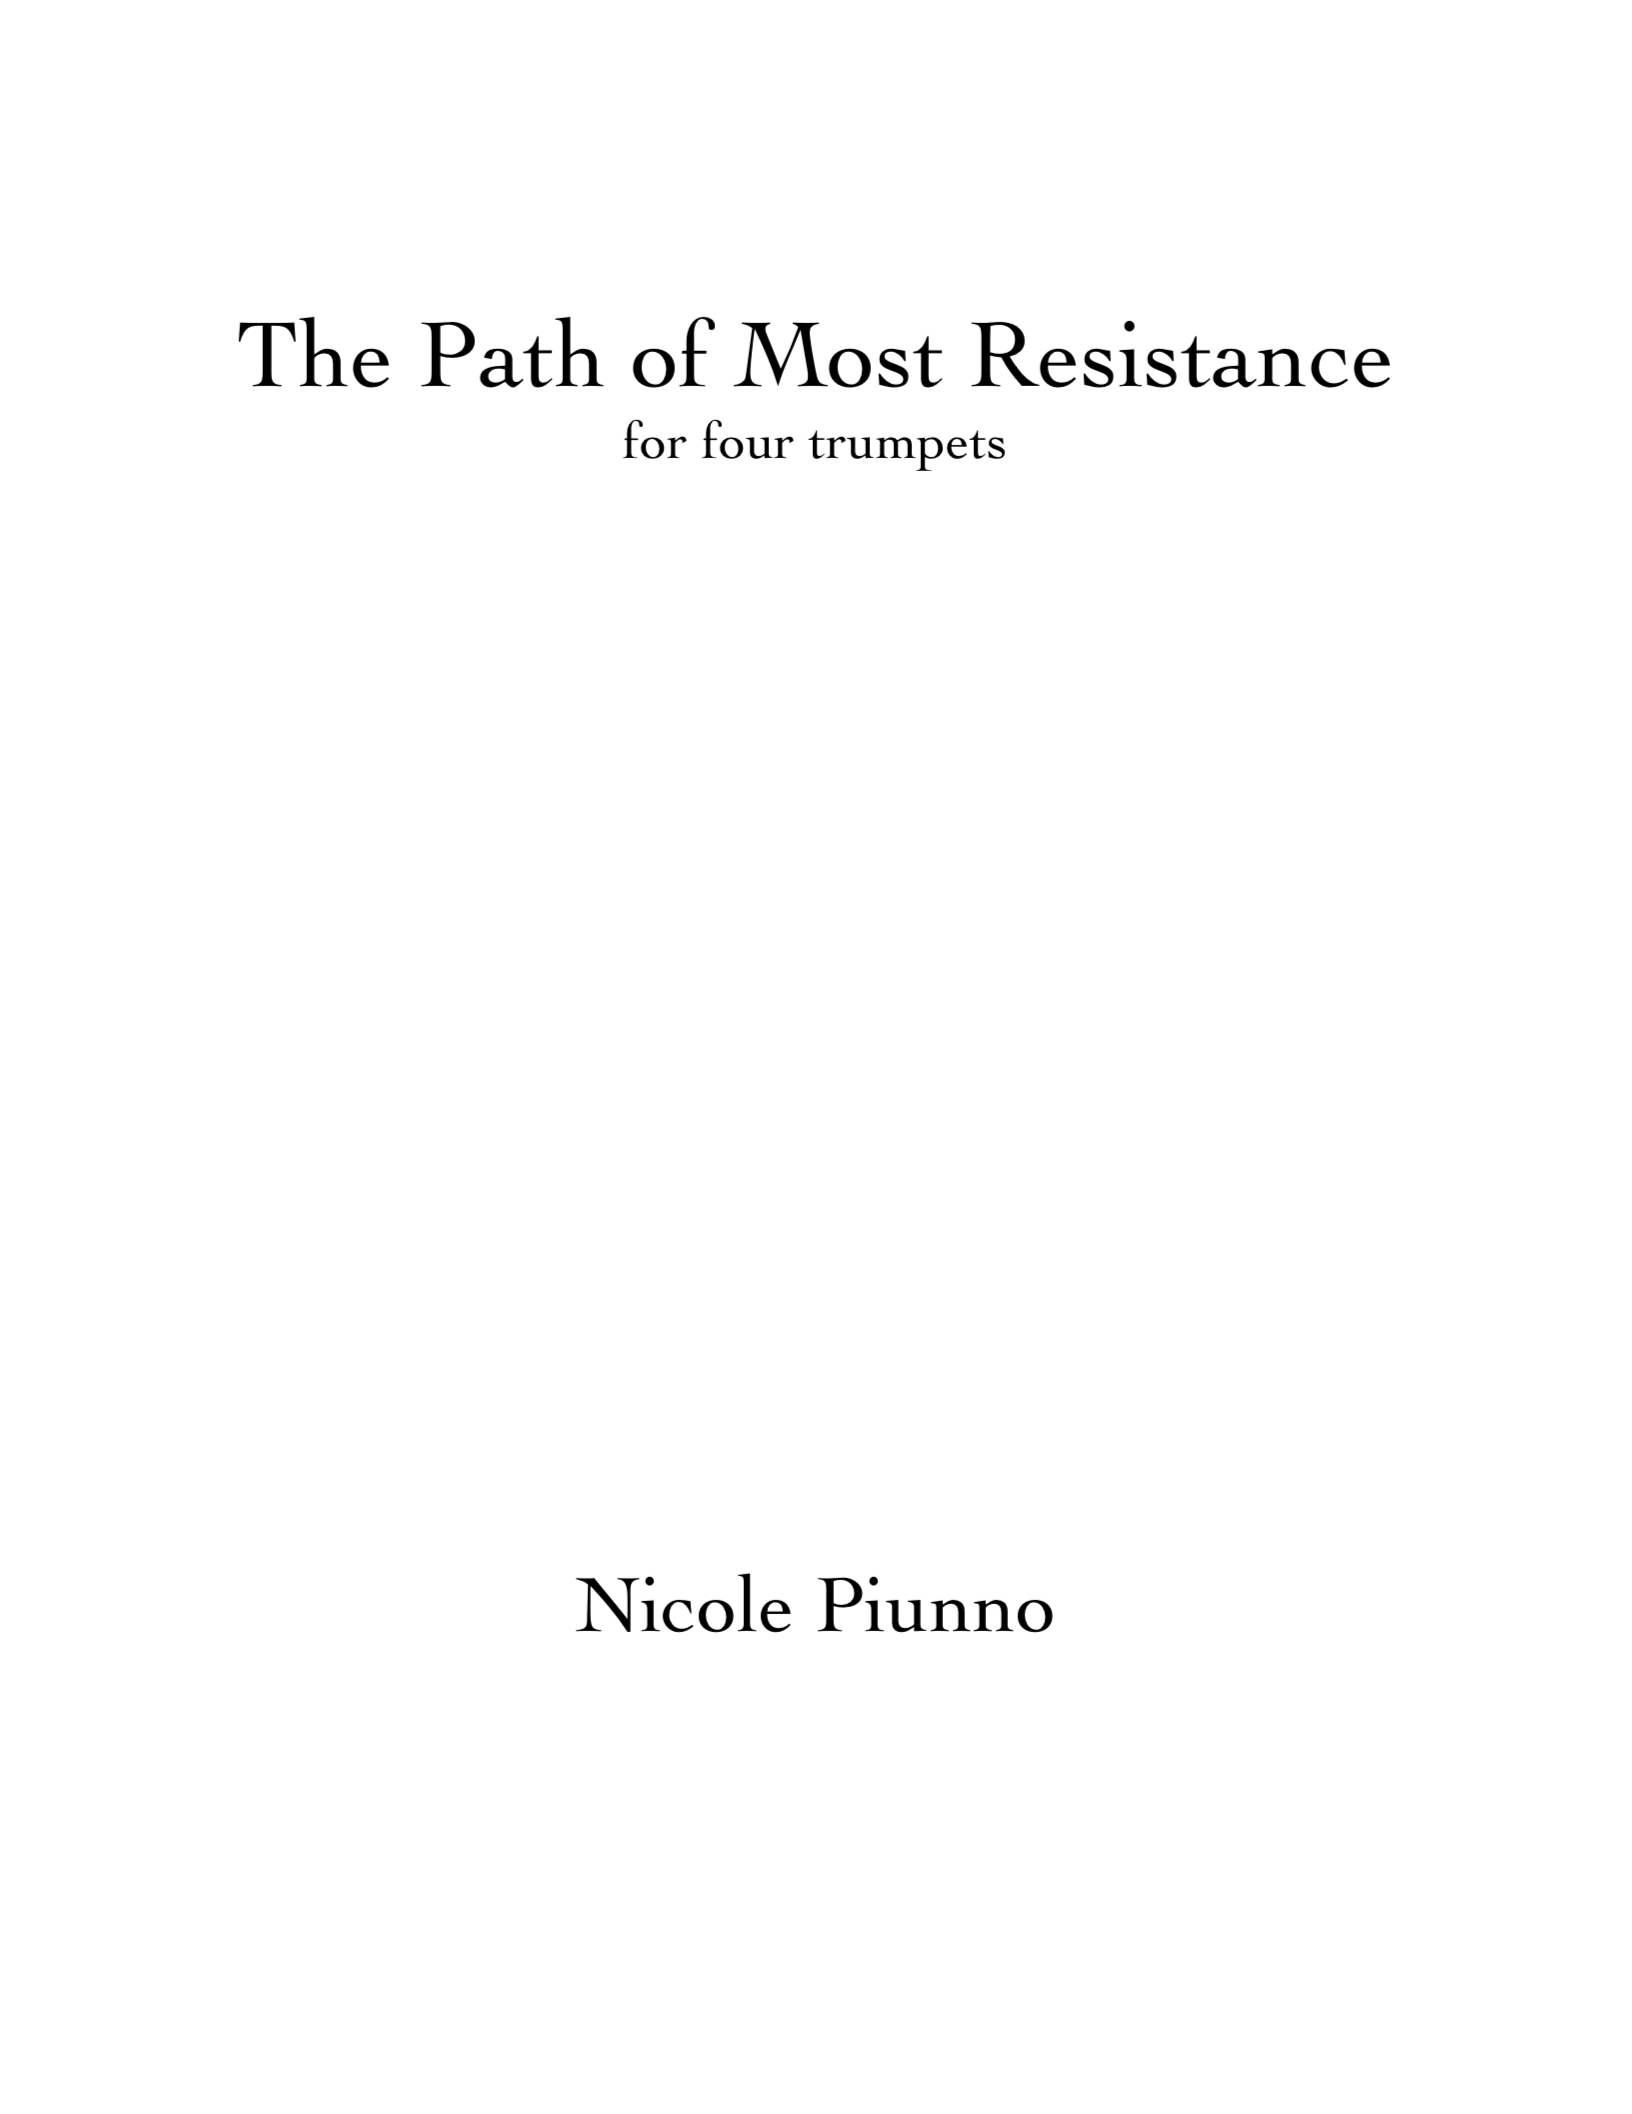 The Path Of Most Resistance  by Nicole Piunno